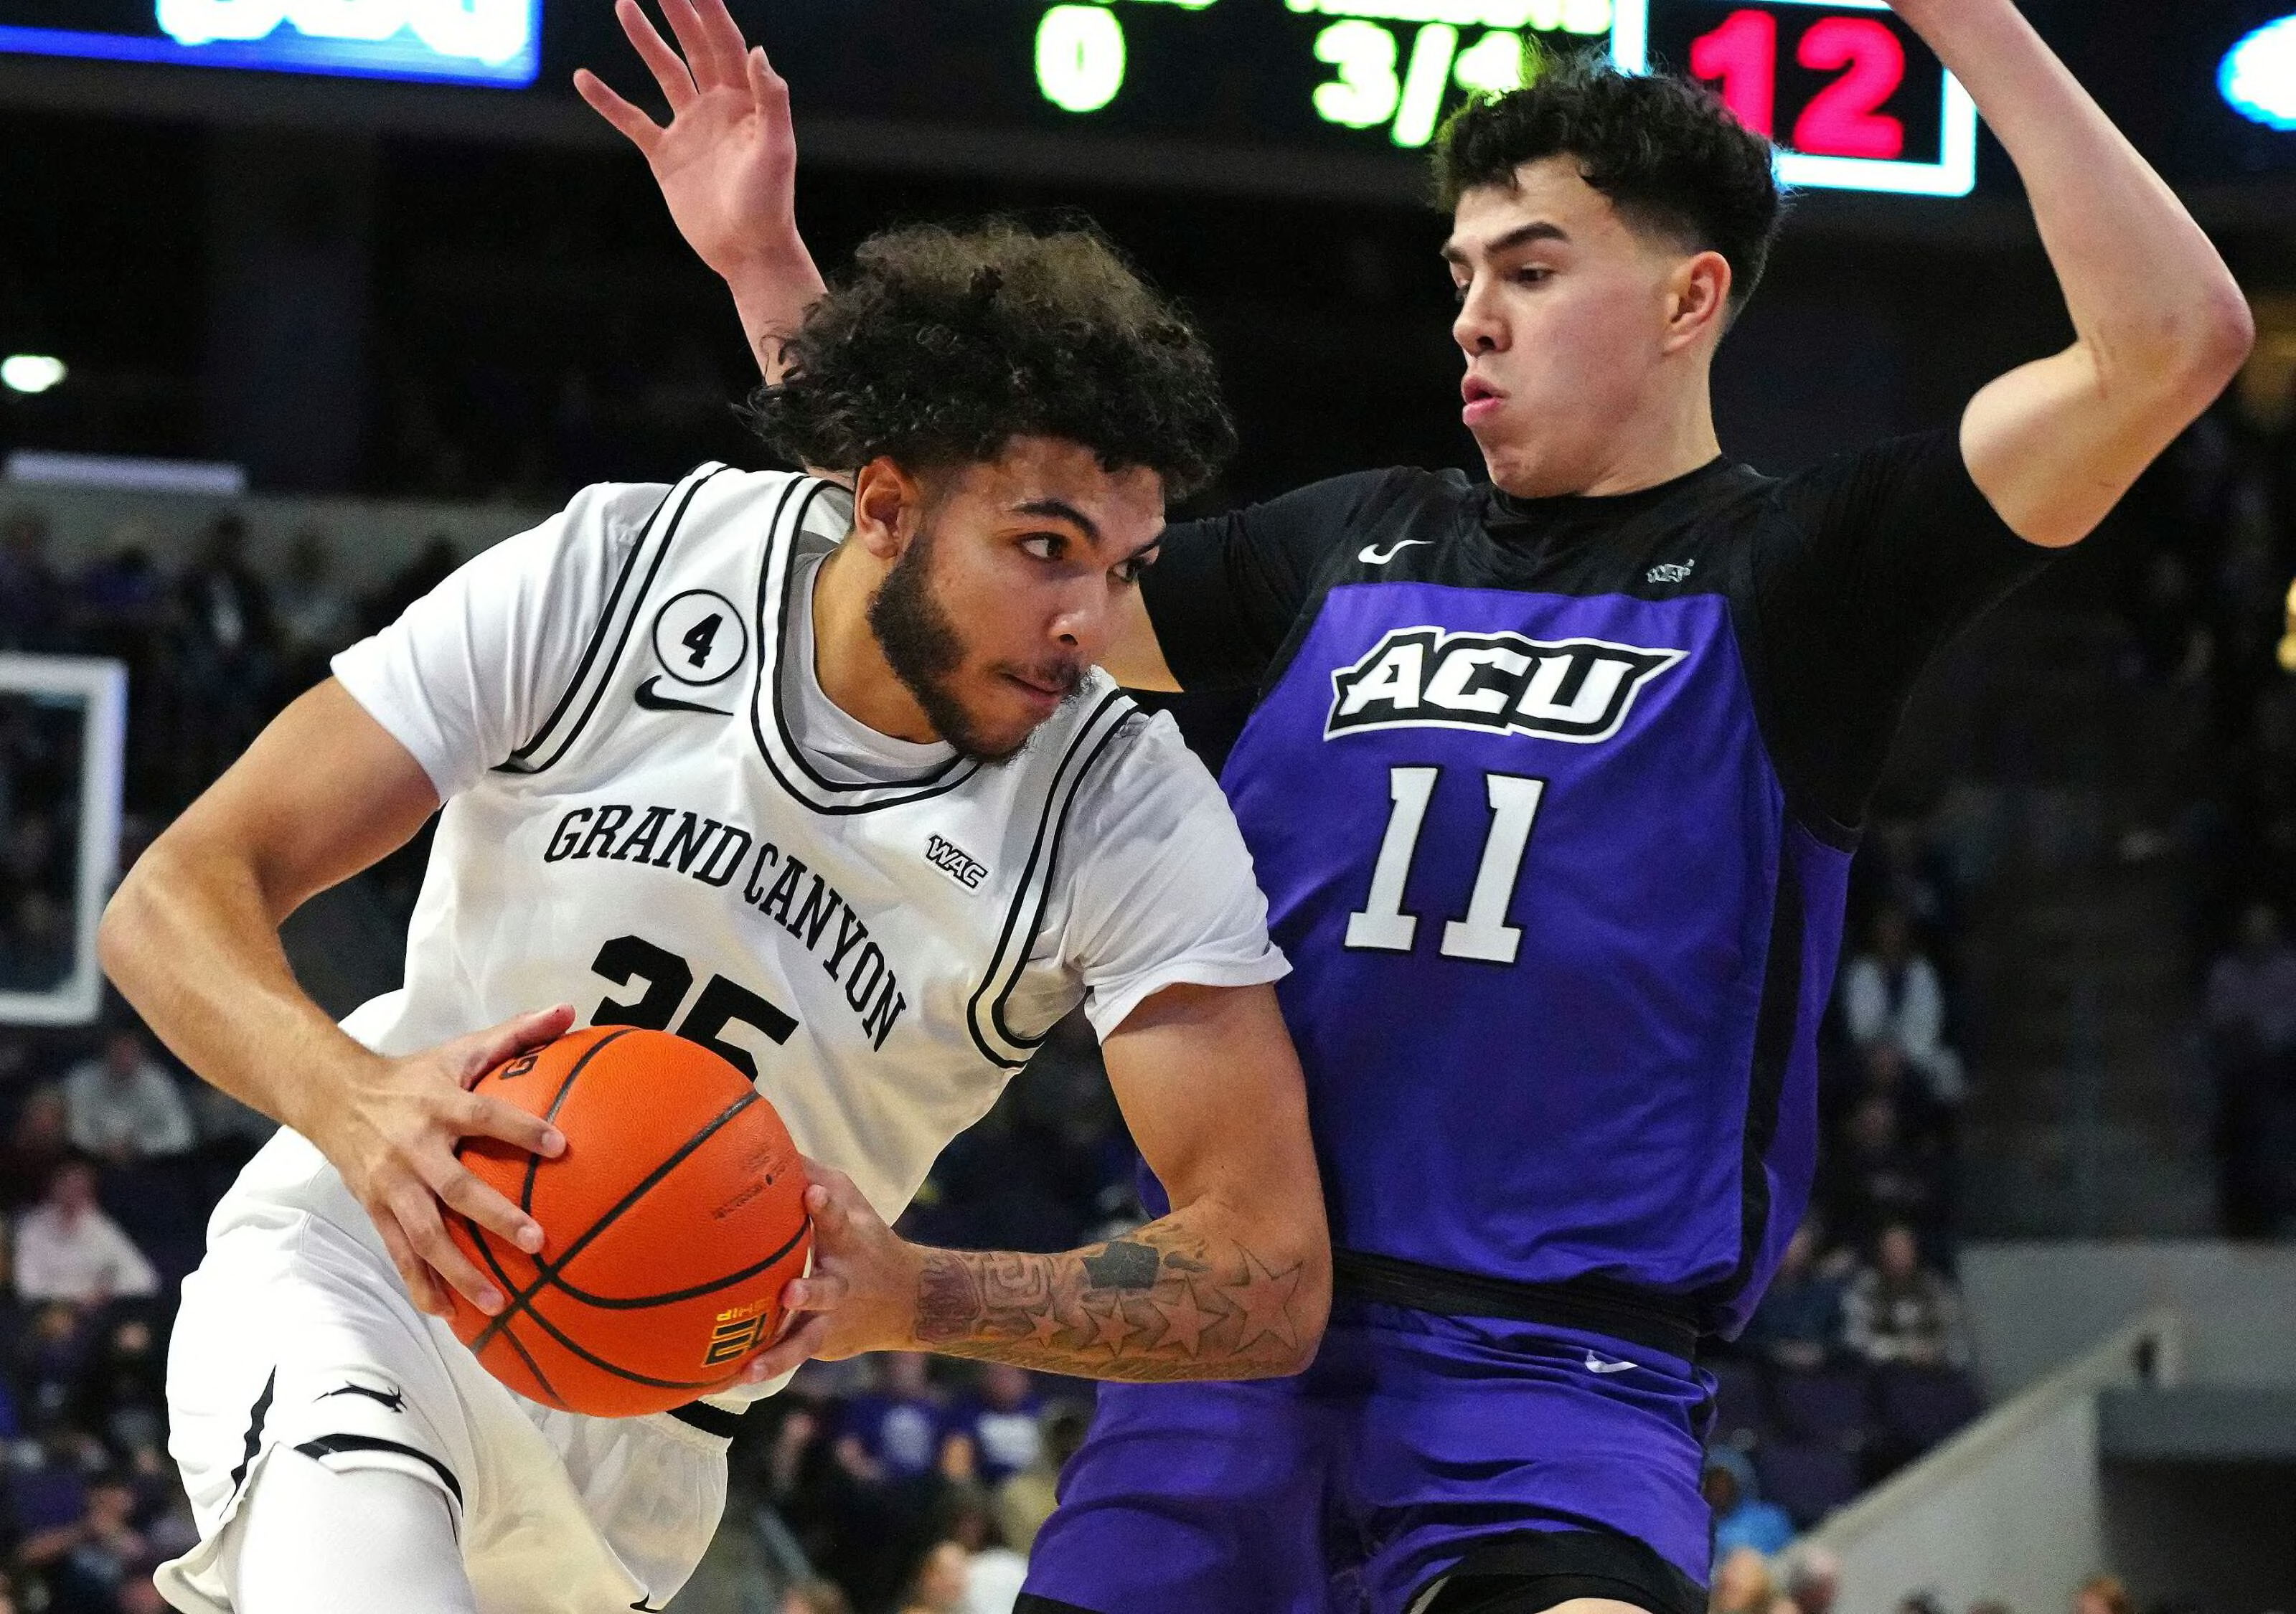 WAC Basketball 2022 Conference Tournament preview and prediction